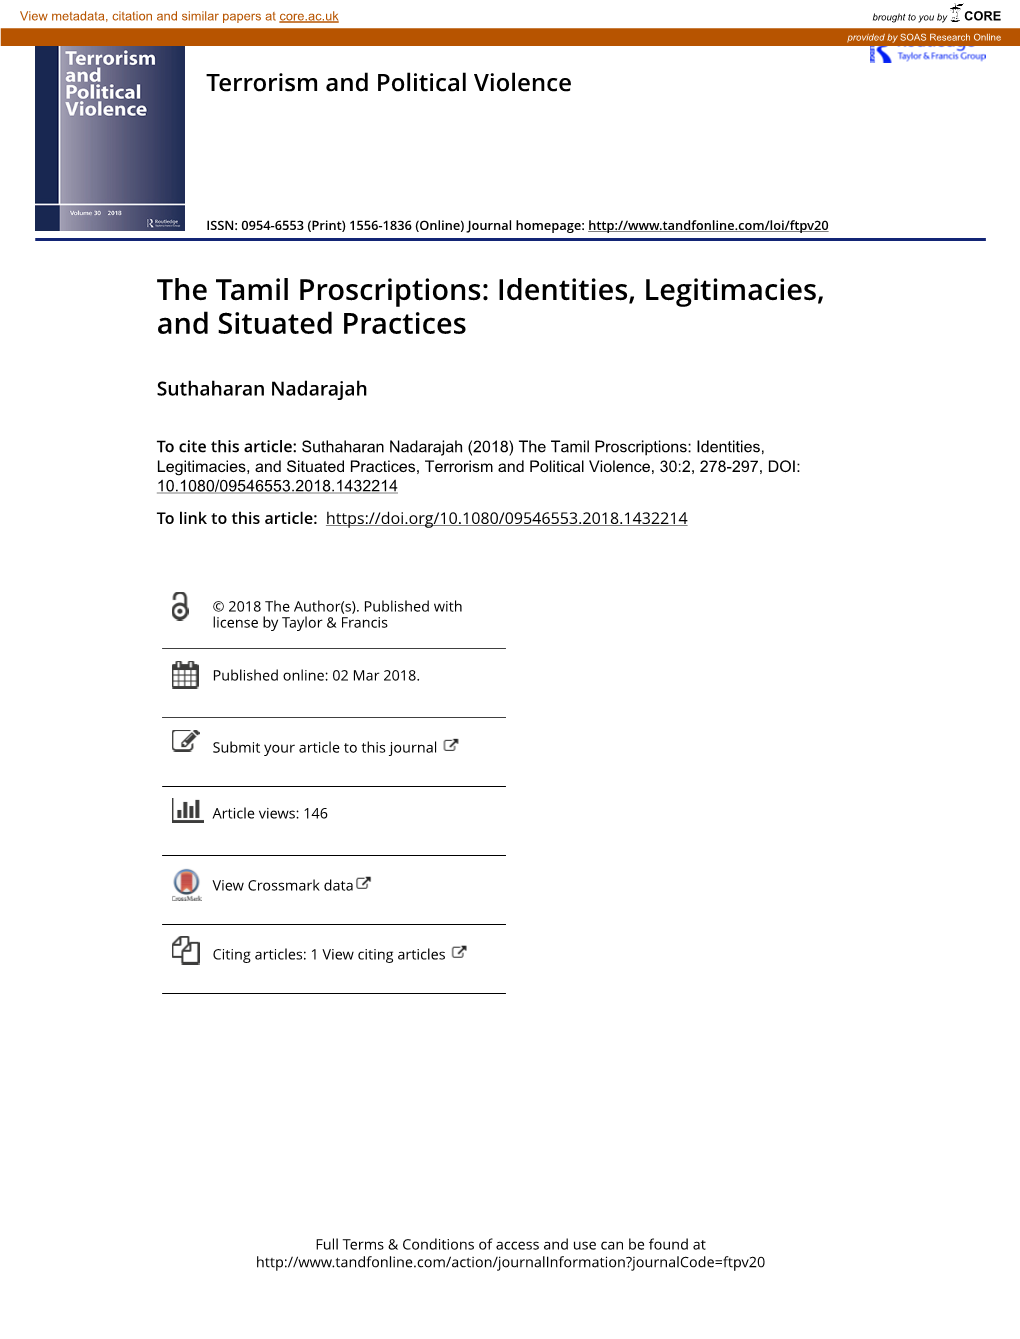 The Tamil Proscriptions: Identities, Legitimacies, and Situated Practices